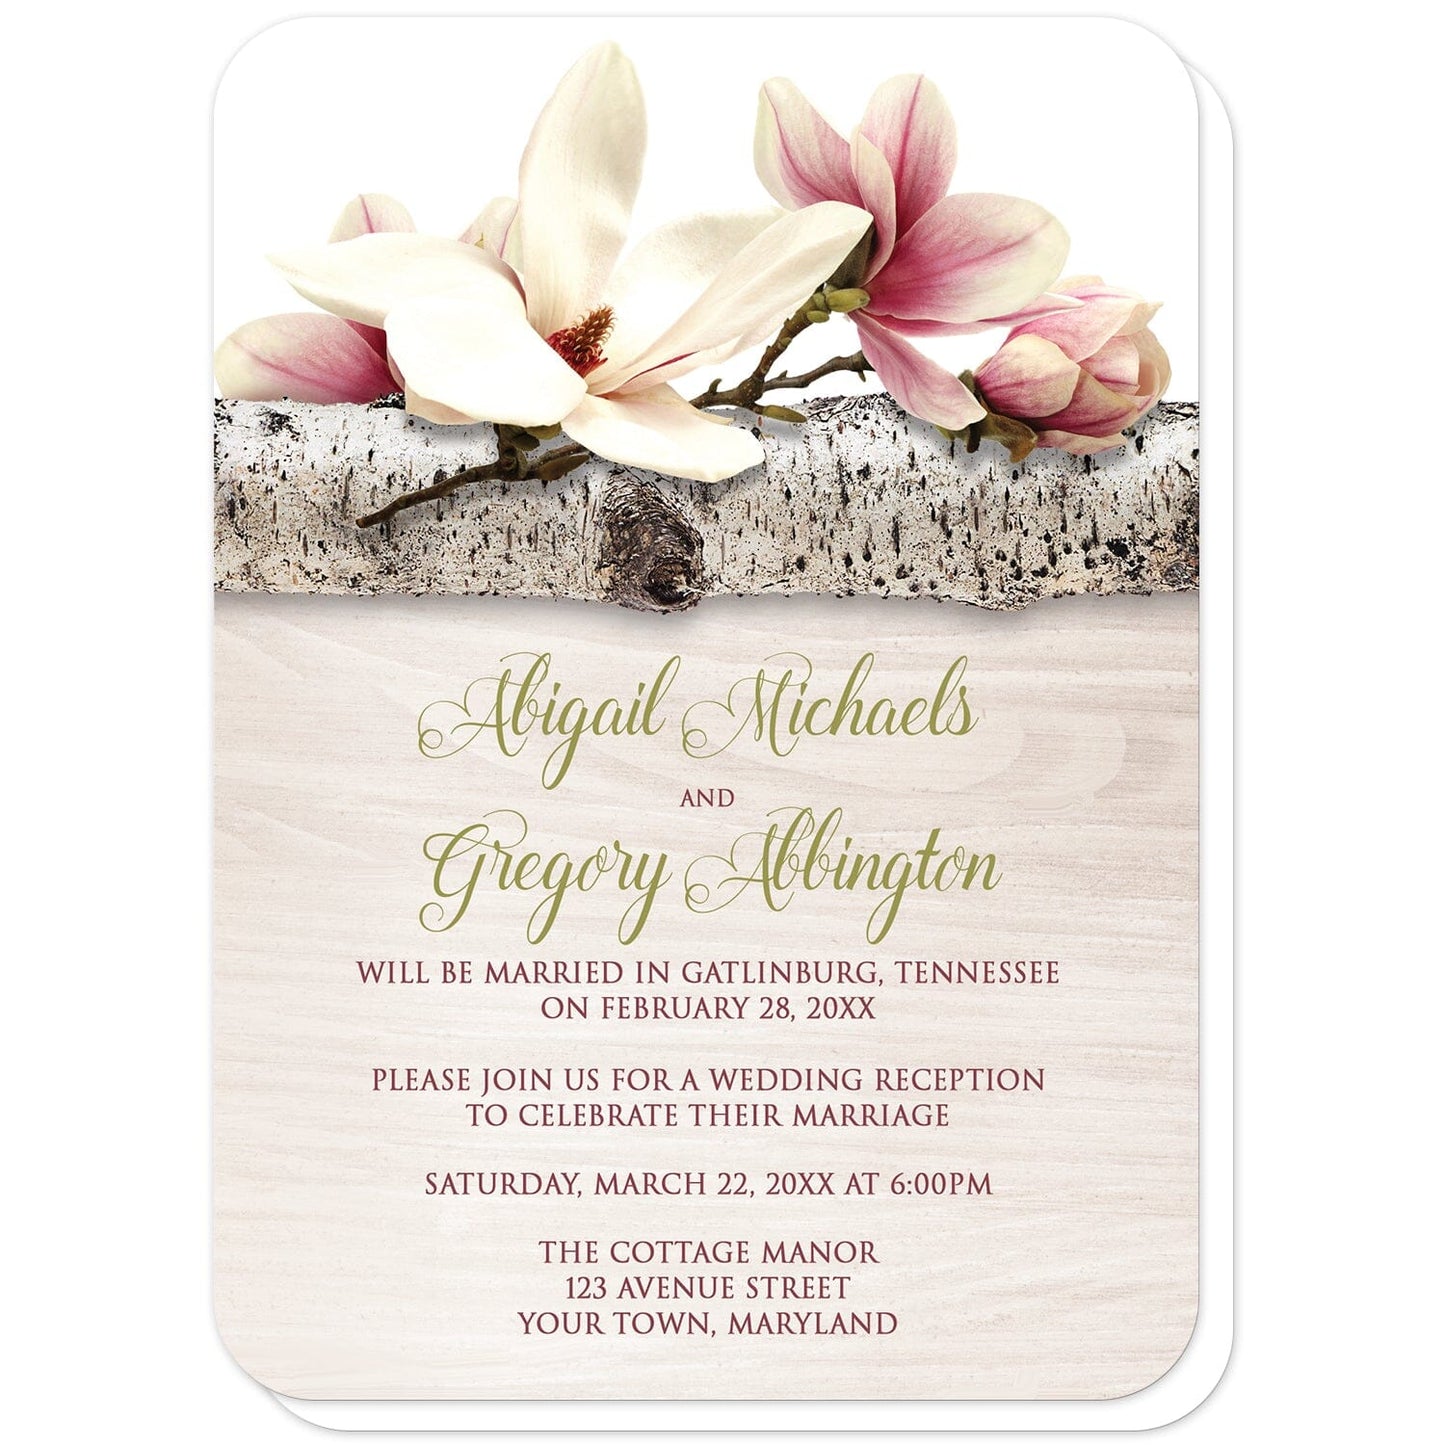 Magnolia Birch Light Wood Floral Reception Only Invitations (with rounded corners) at Artistically Invited. Beautiful magnolia birch light wood floral reception only invitations with pink and white magnolia flowers laying on a birch tree branch along the top. Your personalized post-wedding reception details are custom printed in dark pink and light olive green over a light wood background illustration.